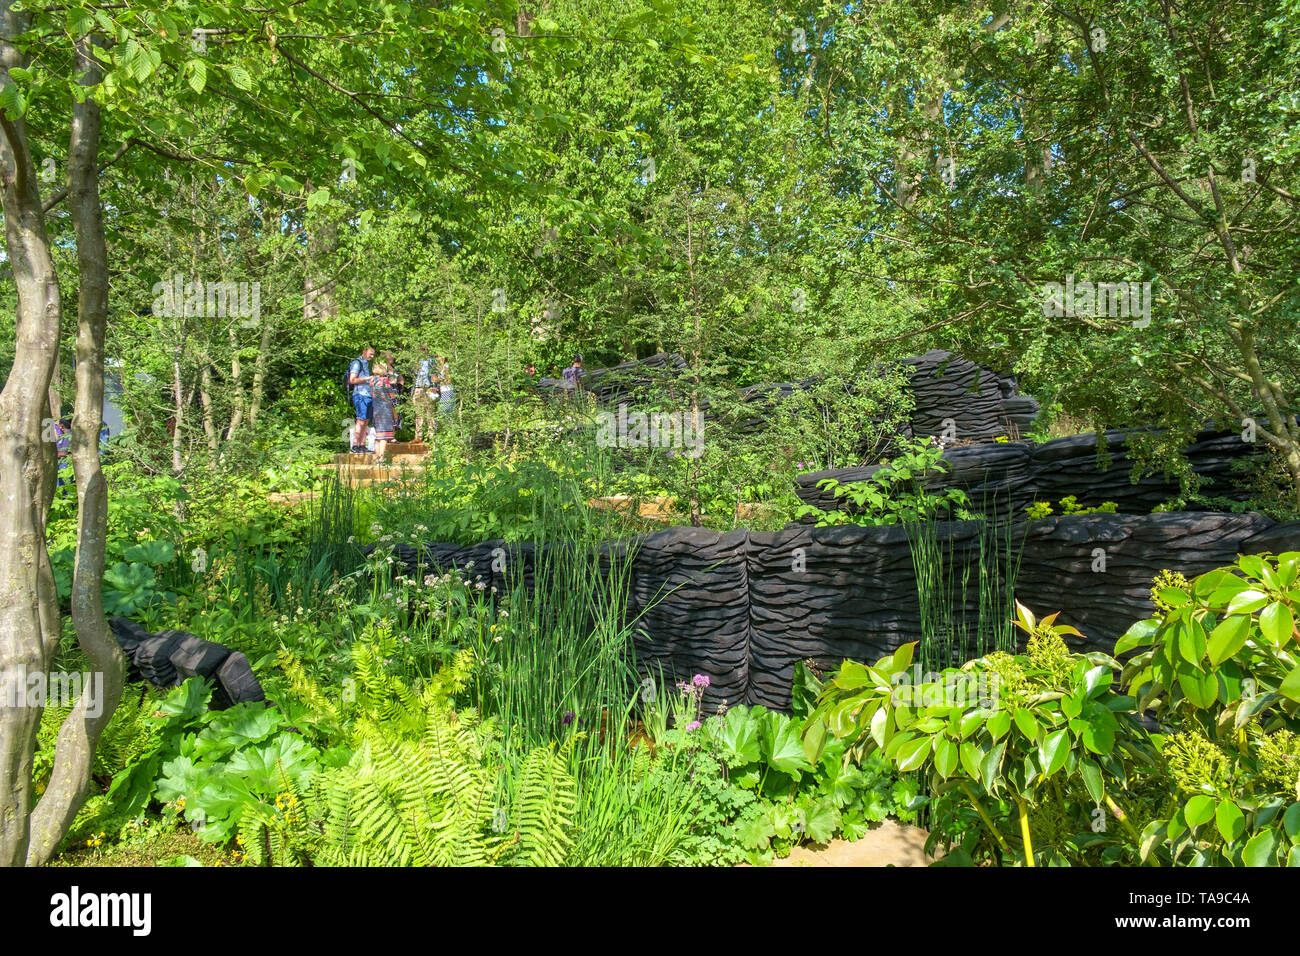 London, UK - May 22nd 2019: RHS Chelsea Flower Show, the M&G Garden judged to be the best in show. Controversial as it was planted mainly in green. Stock Photo